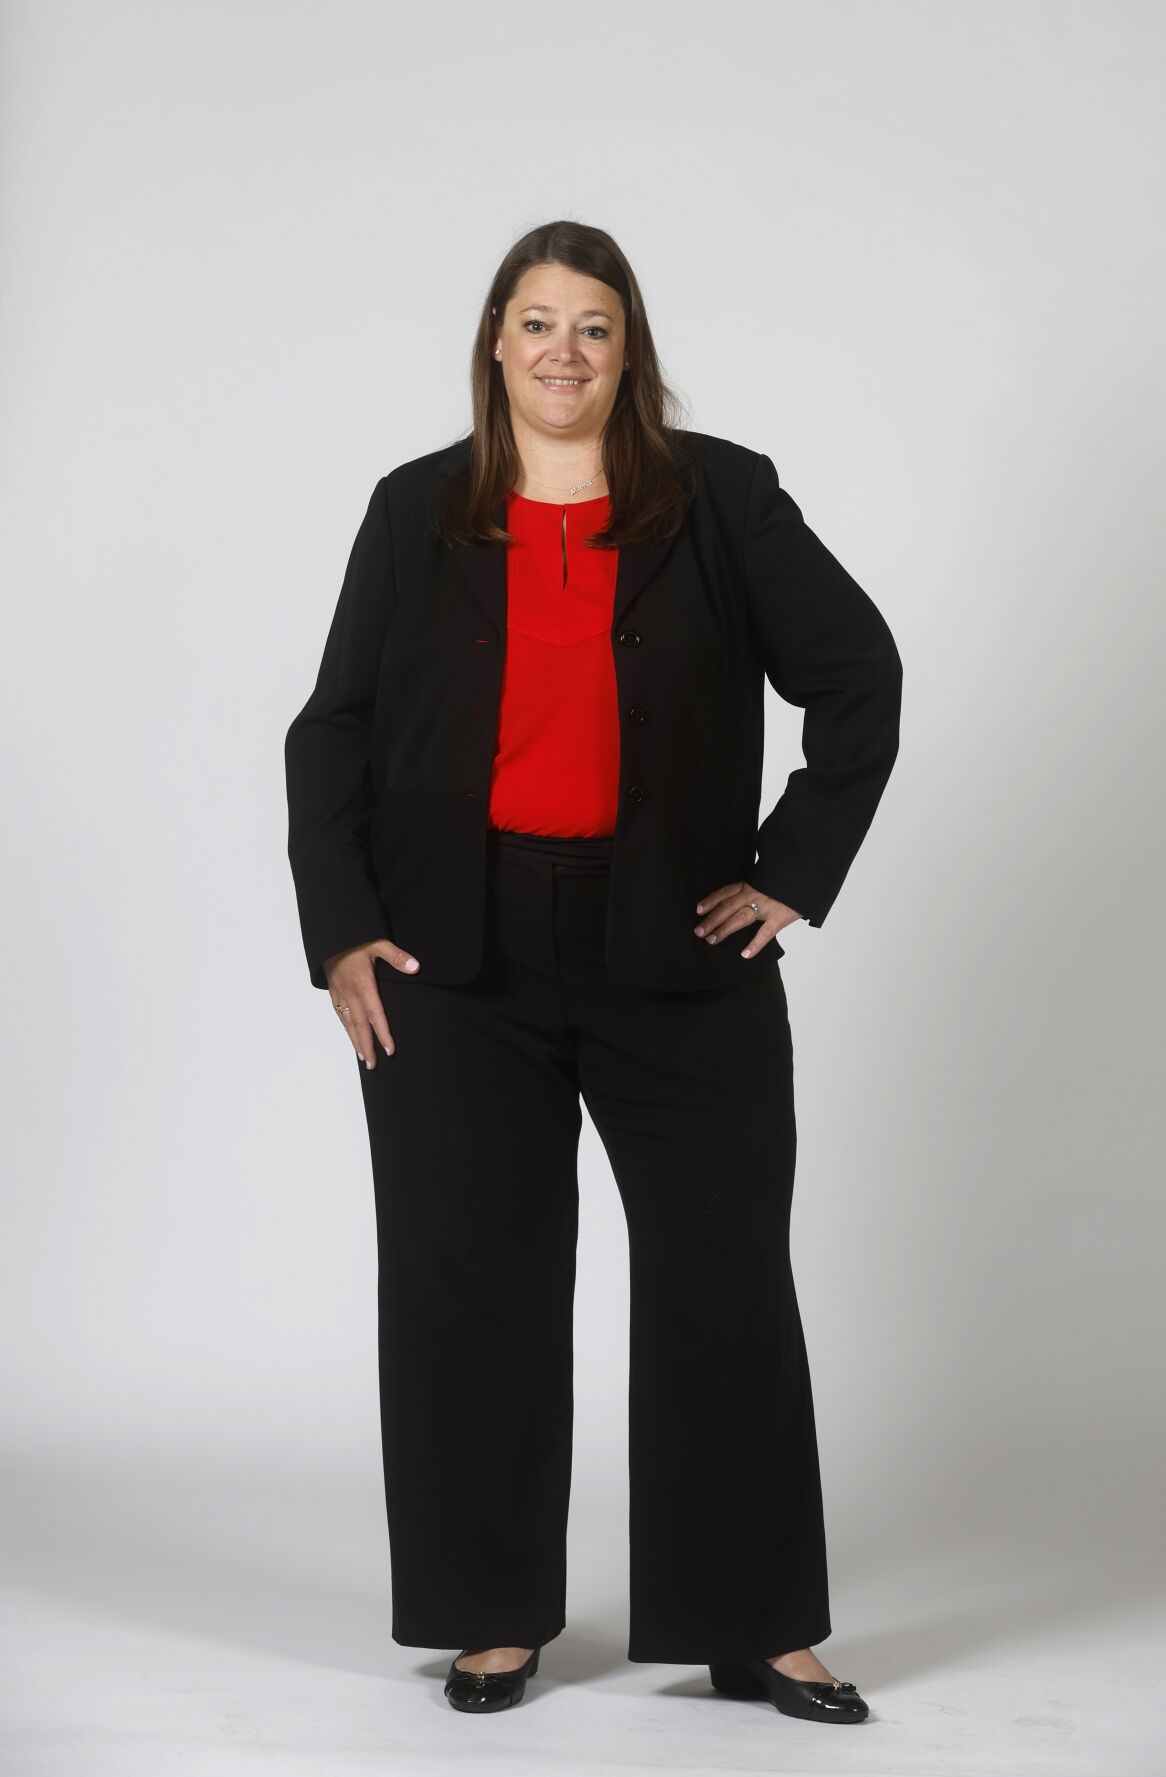 Renee Hesselman, with Honkamp, P.C., is a Rising Star.    PHOTO CREDIT: Jessica Reilly